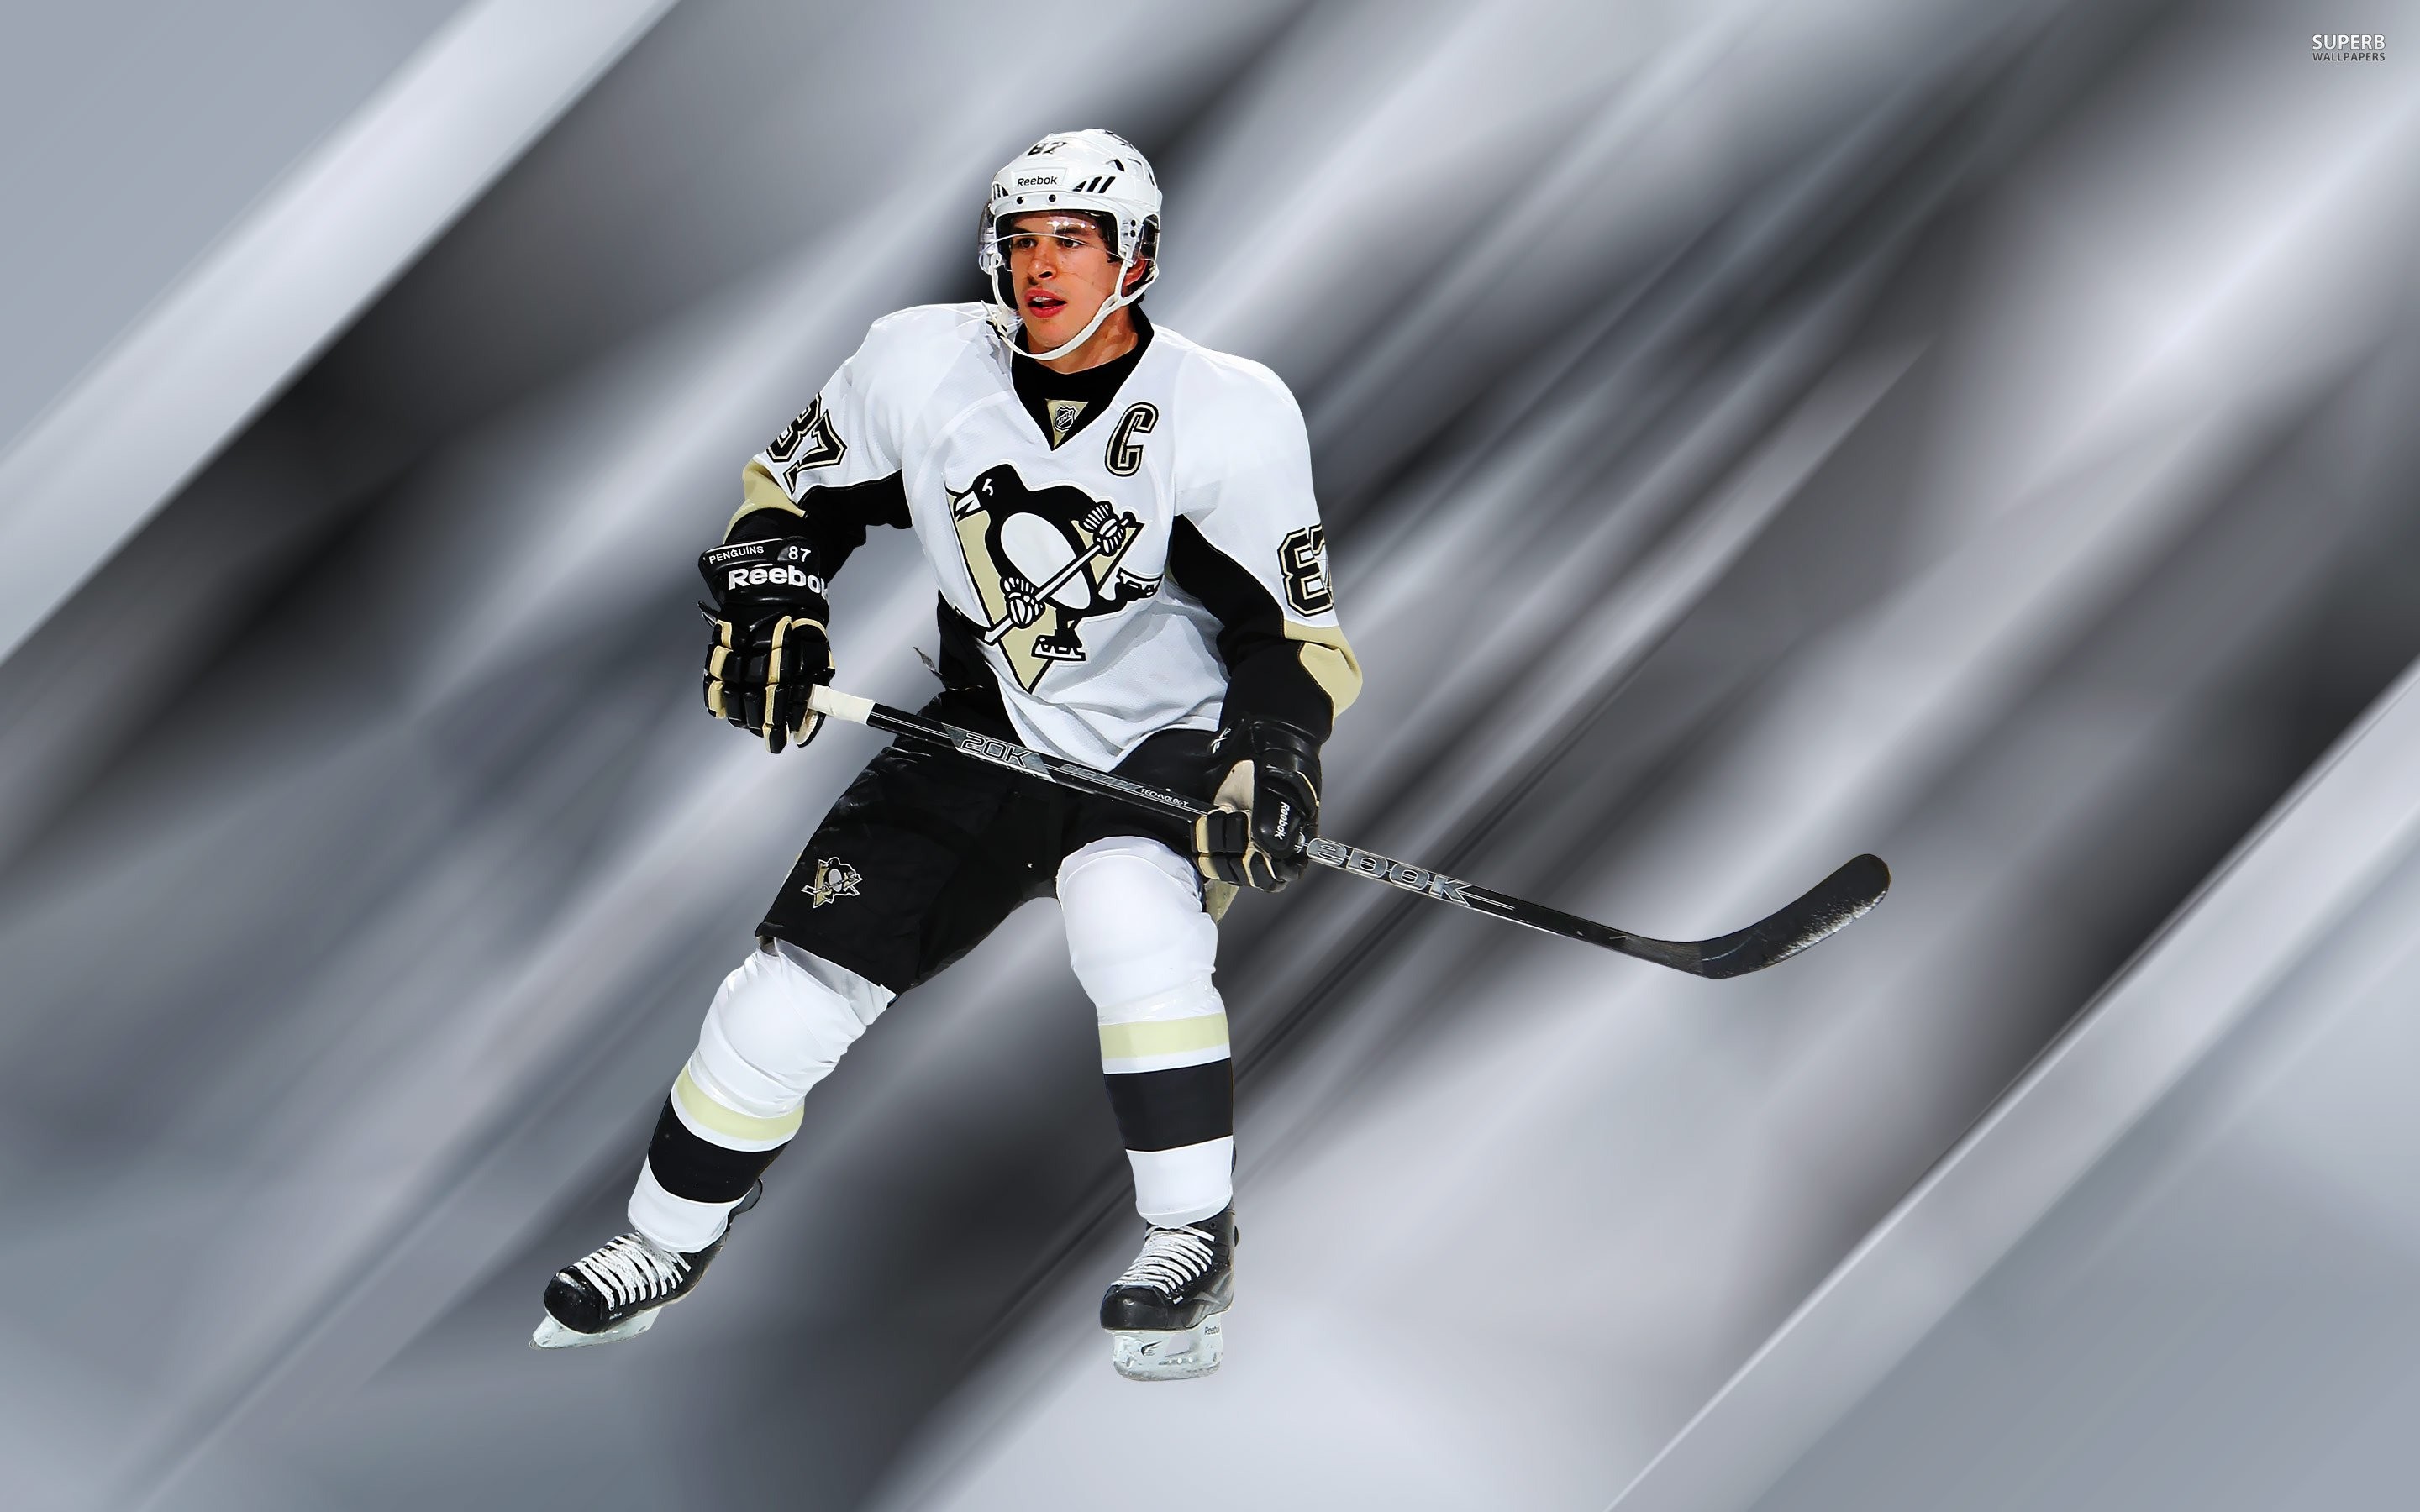 Sidney Crosby 499432. SHARE. TAGS Pittsburgh Penguins NHL Hockey